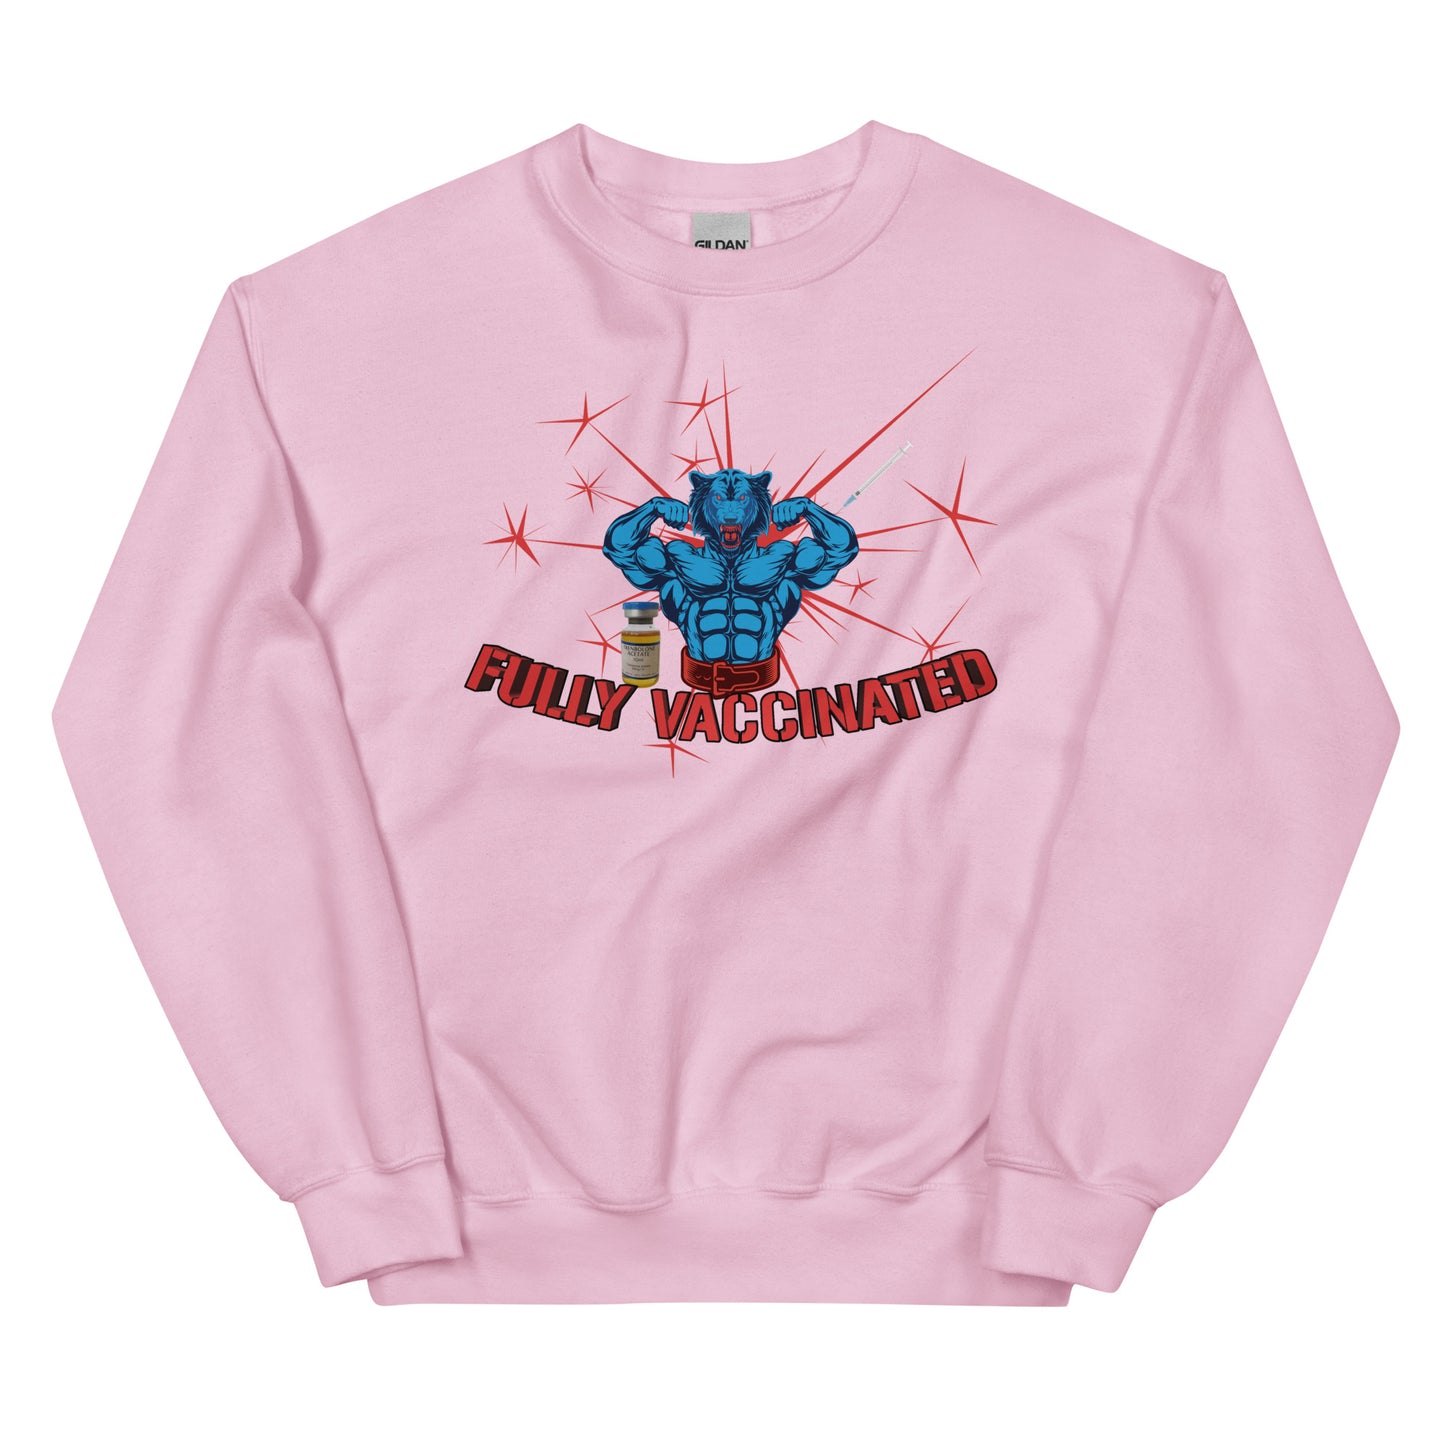 Fully Vaccinated Crewneck